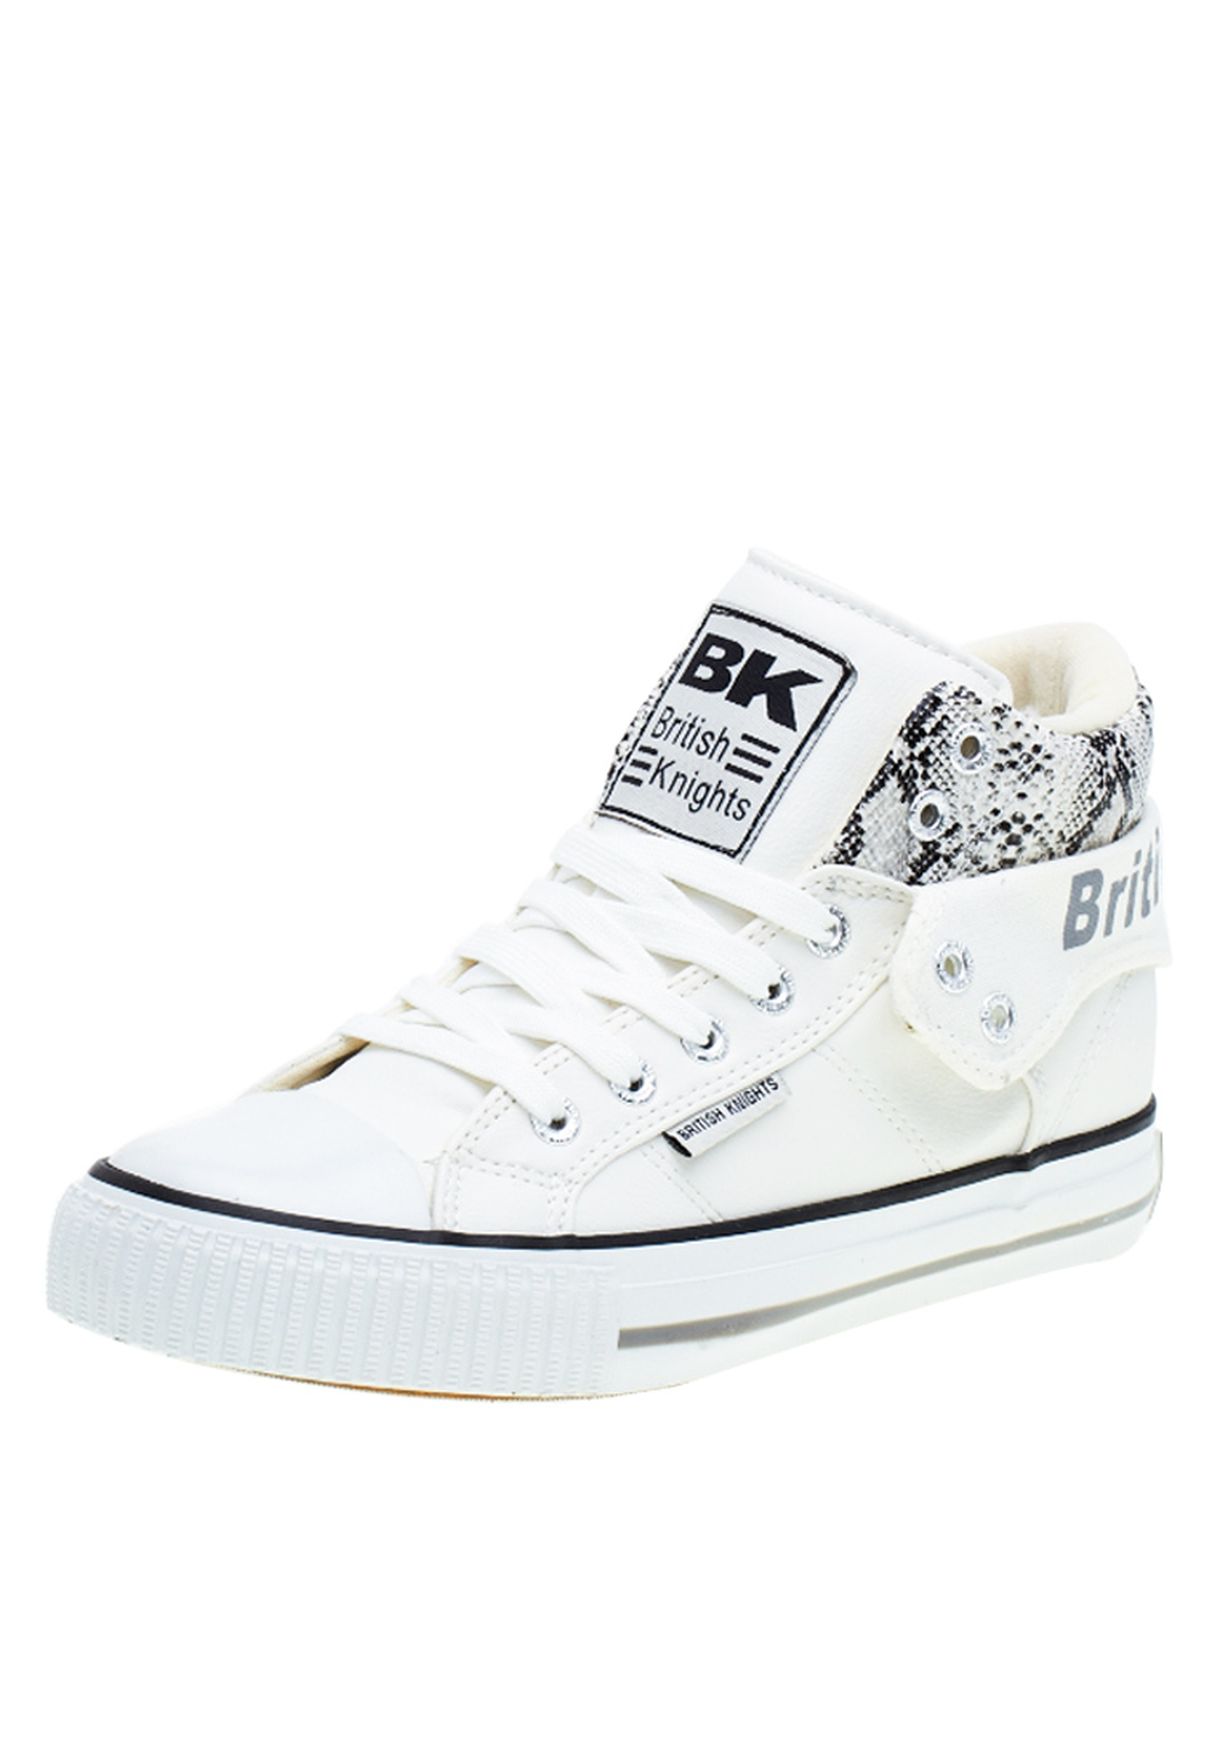 british knights shoes womens